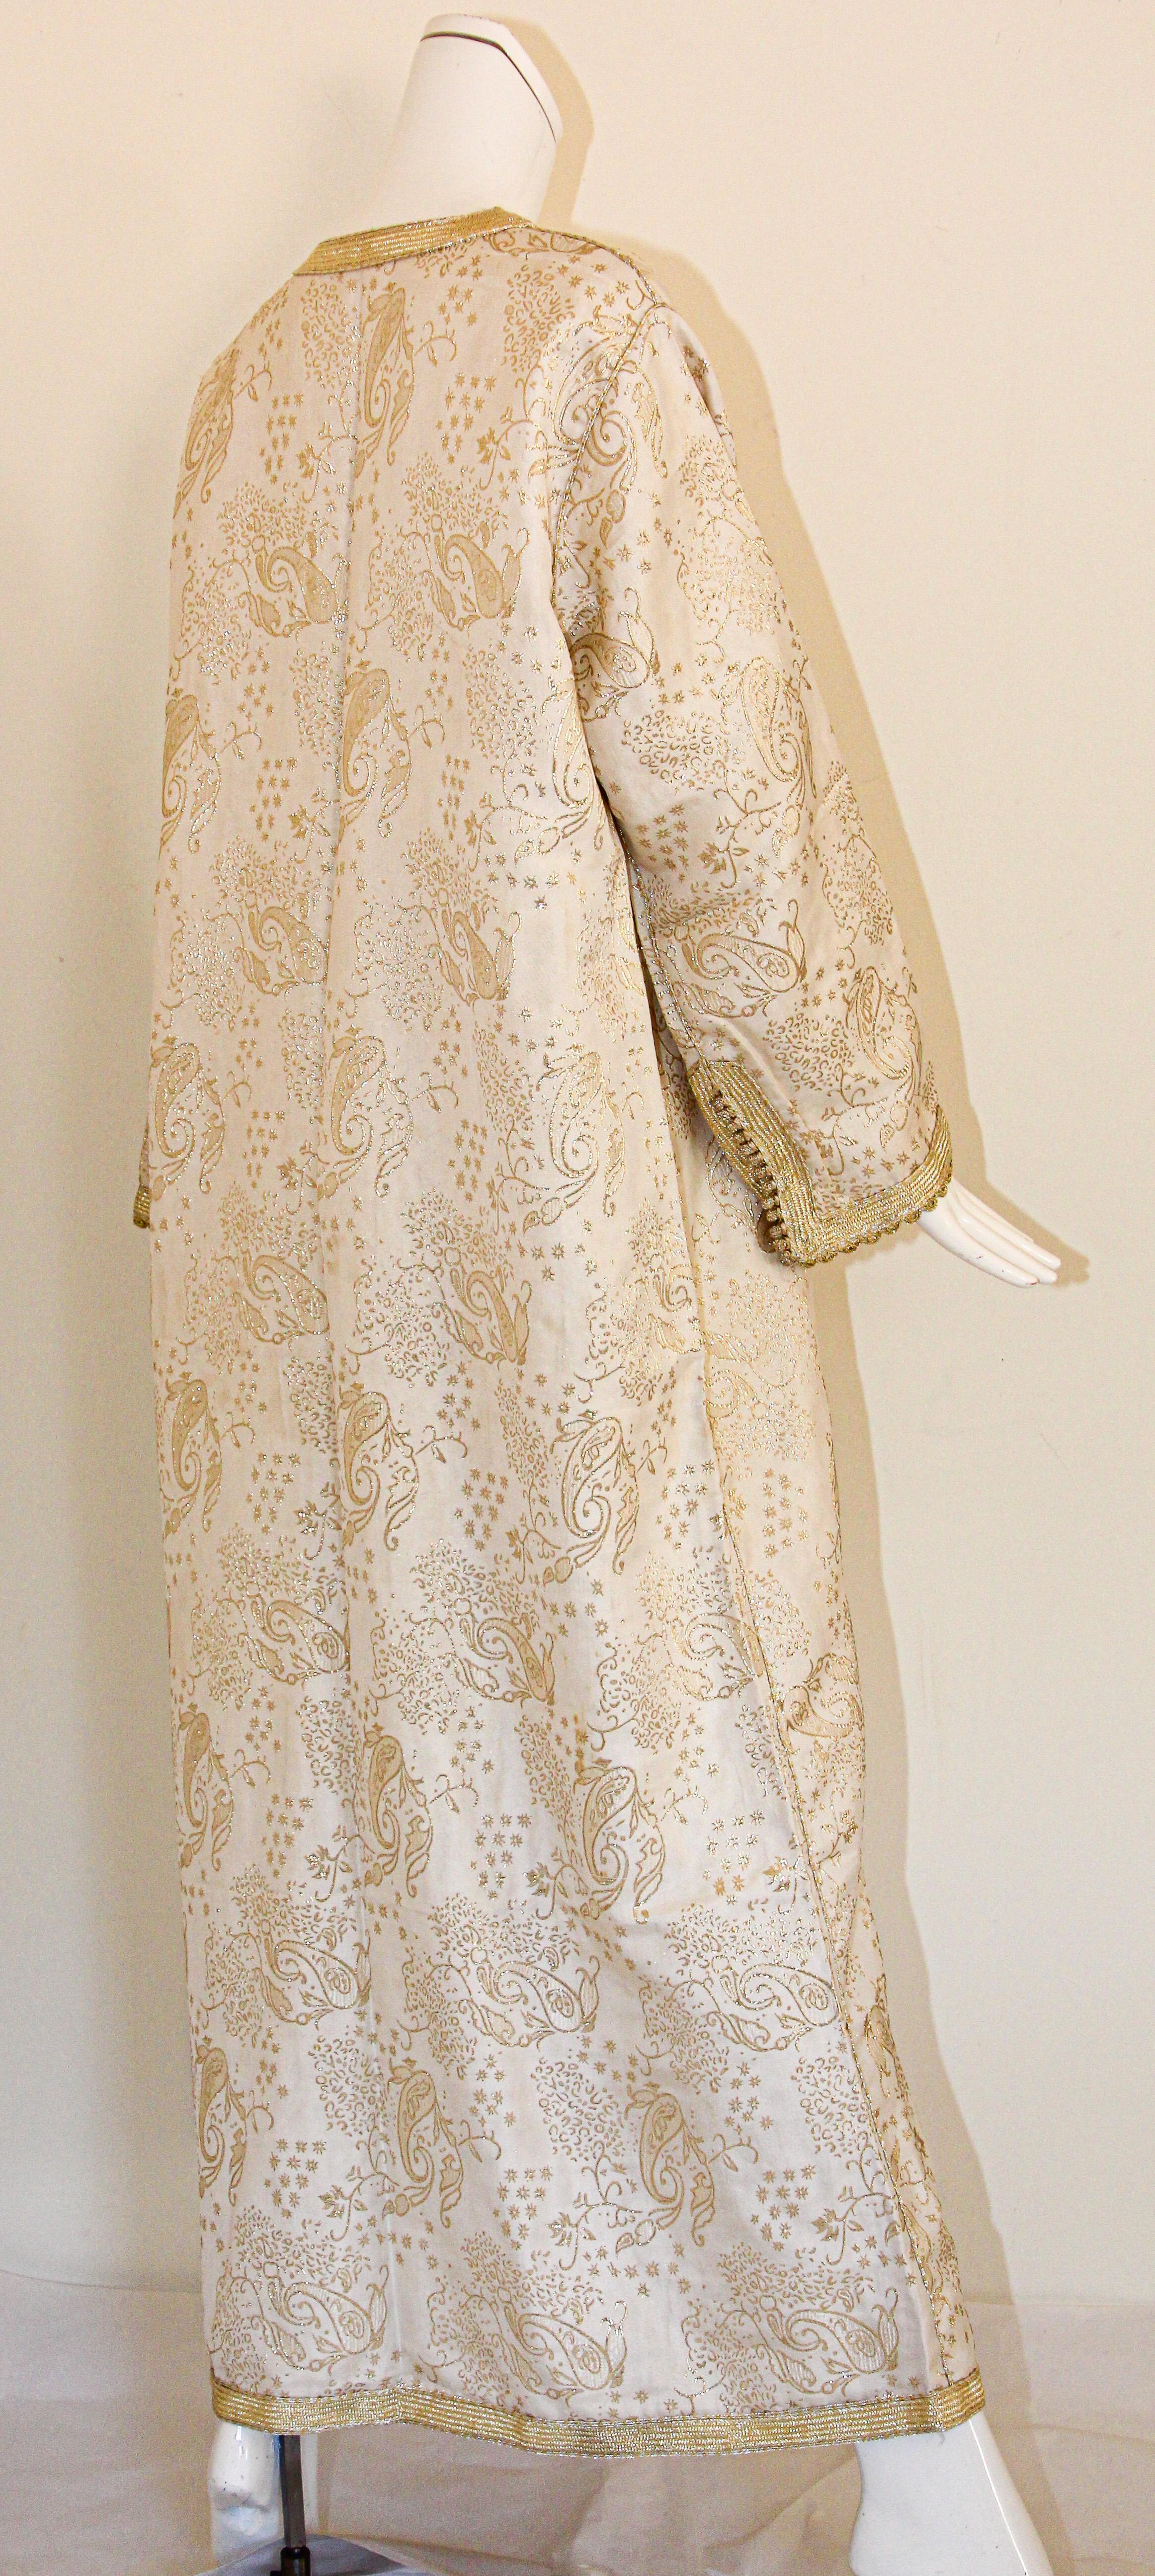 Elegant Moroccan White Caftan with Gold Metallic Floral Brocade For Sale 7